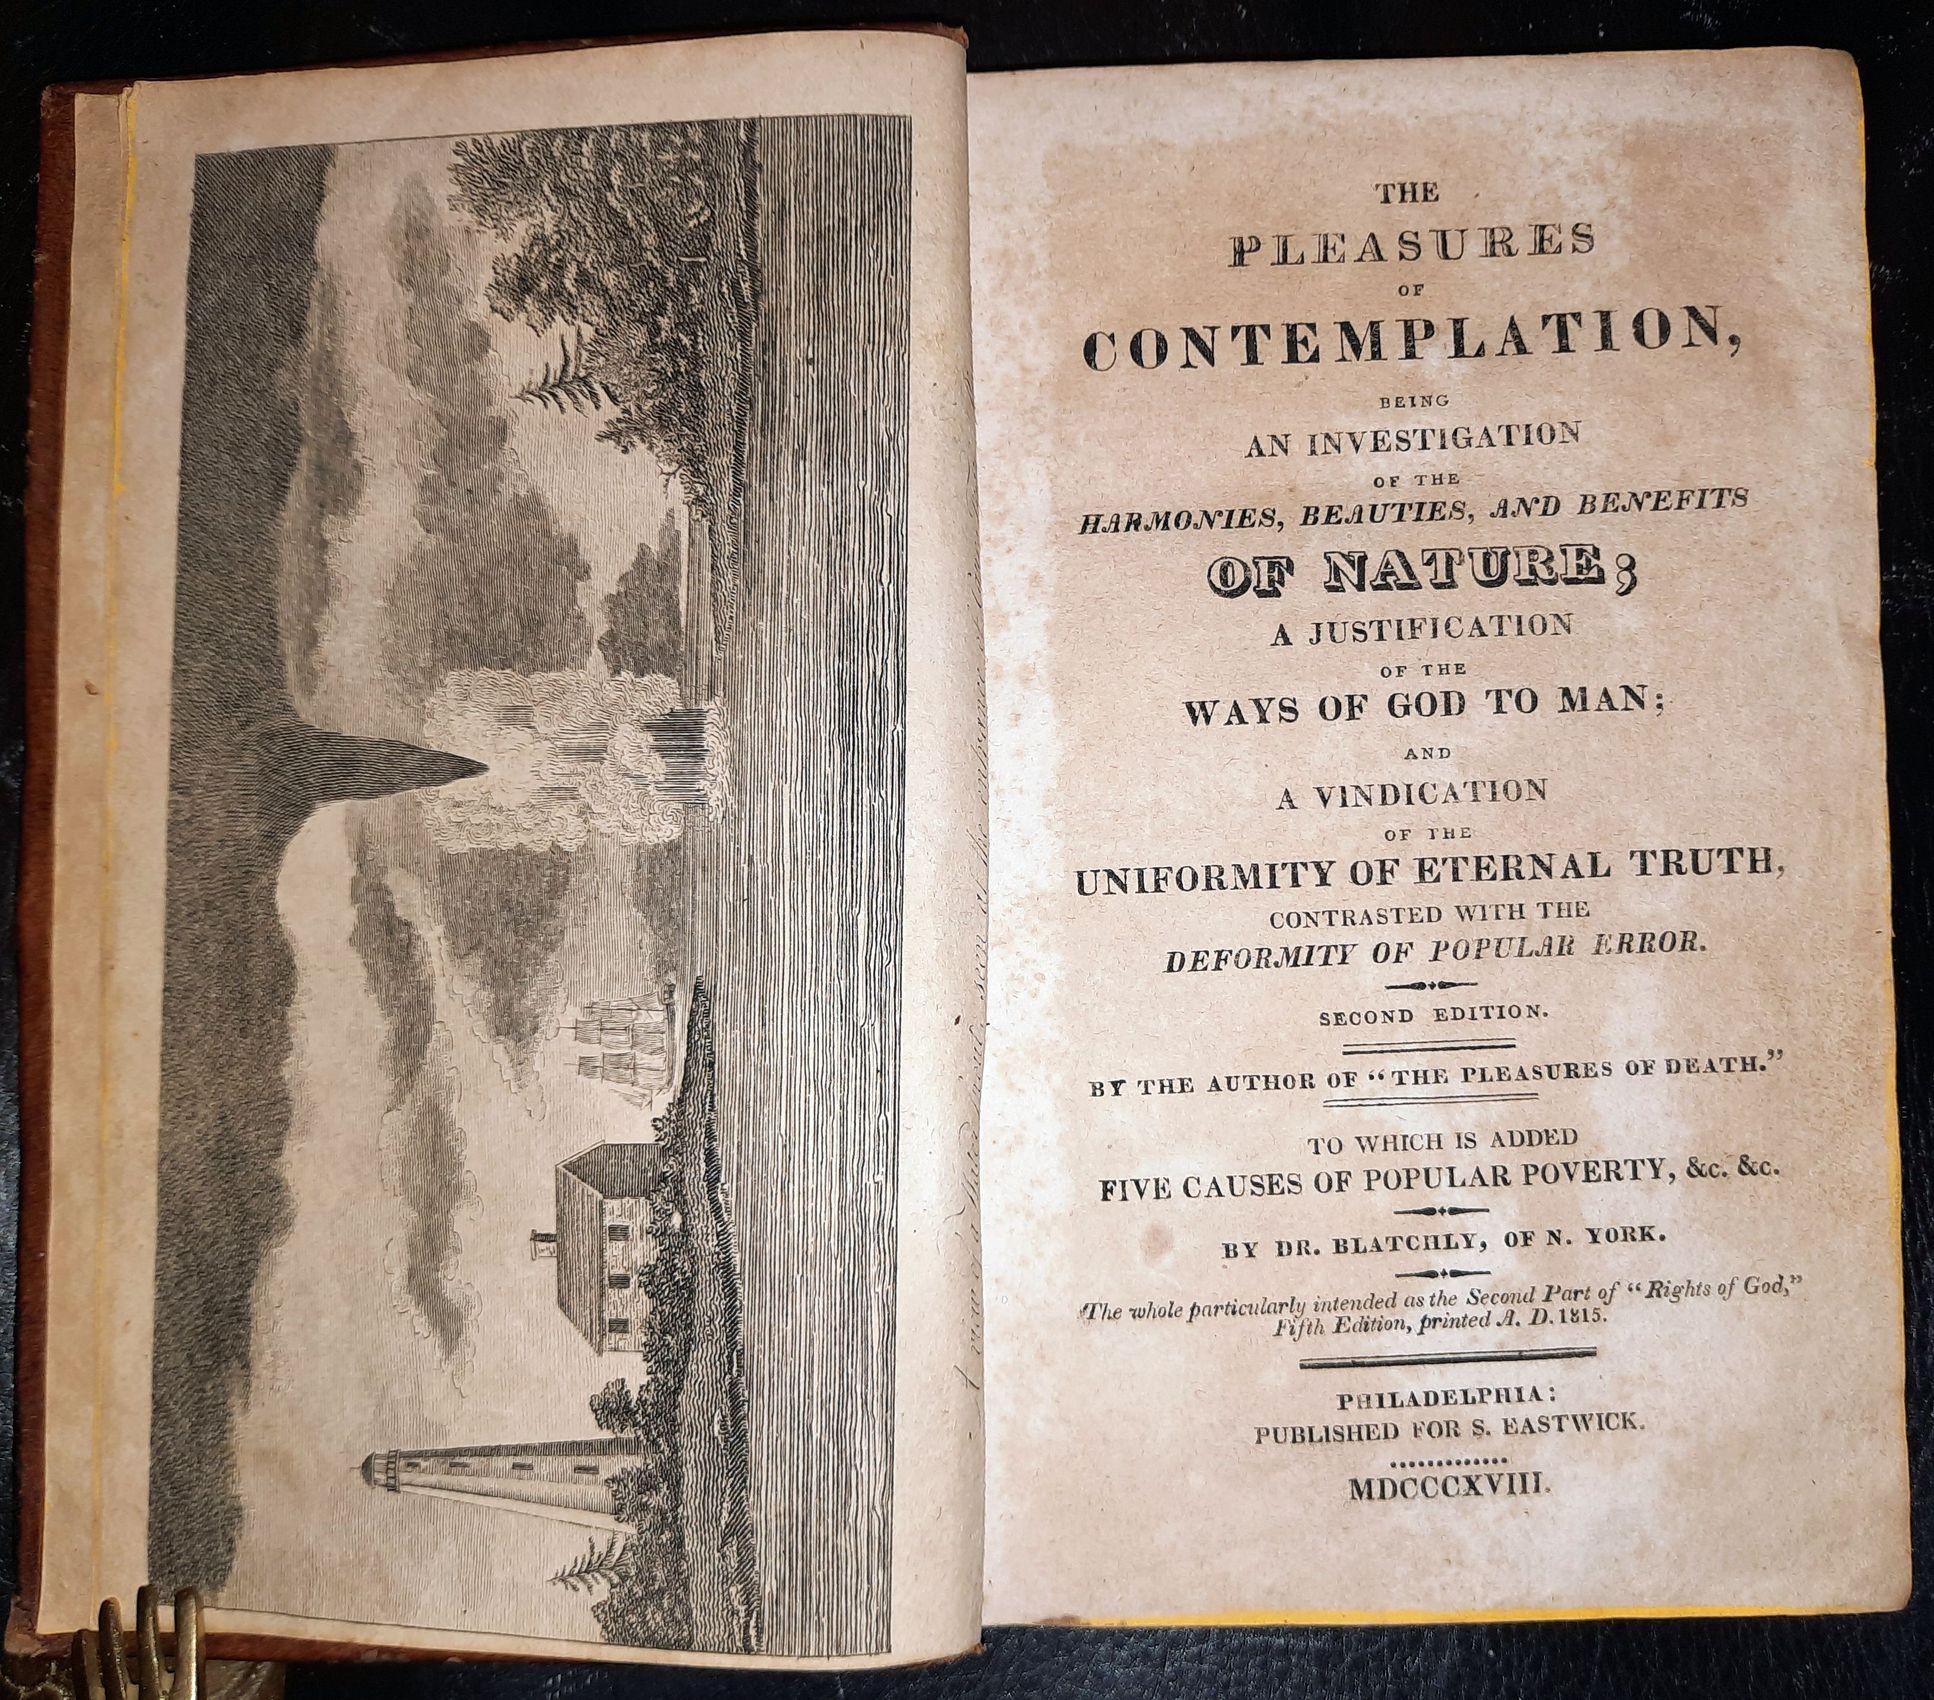 BLATCHLY, CORNELIUS CAMDEN: - The pleasures of contemplation, being a desultory investigation of the harmonies, beauties, and benefits of nature : including a justification of the ways of god to man, and a glimpse of his sovereign beauty. To which ist added, some causes of popular poverty..